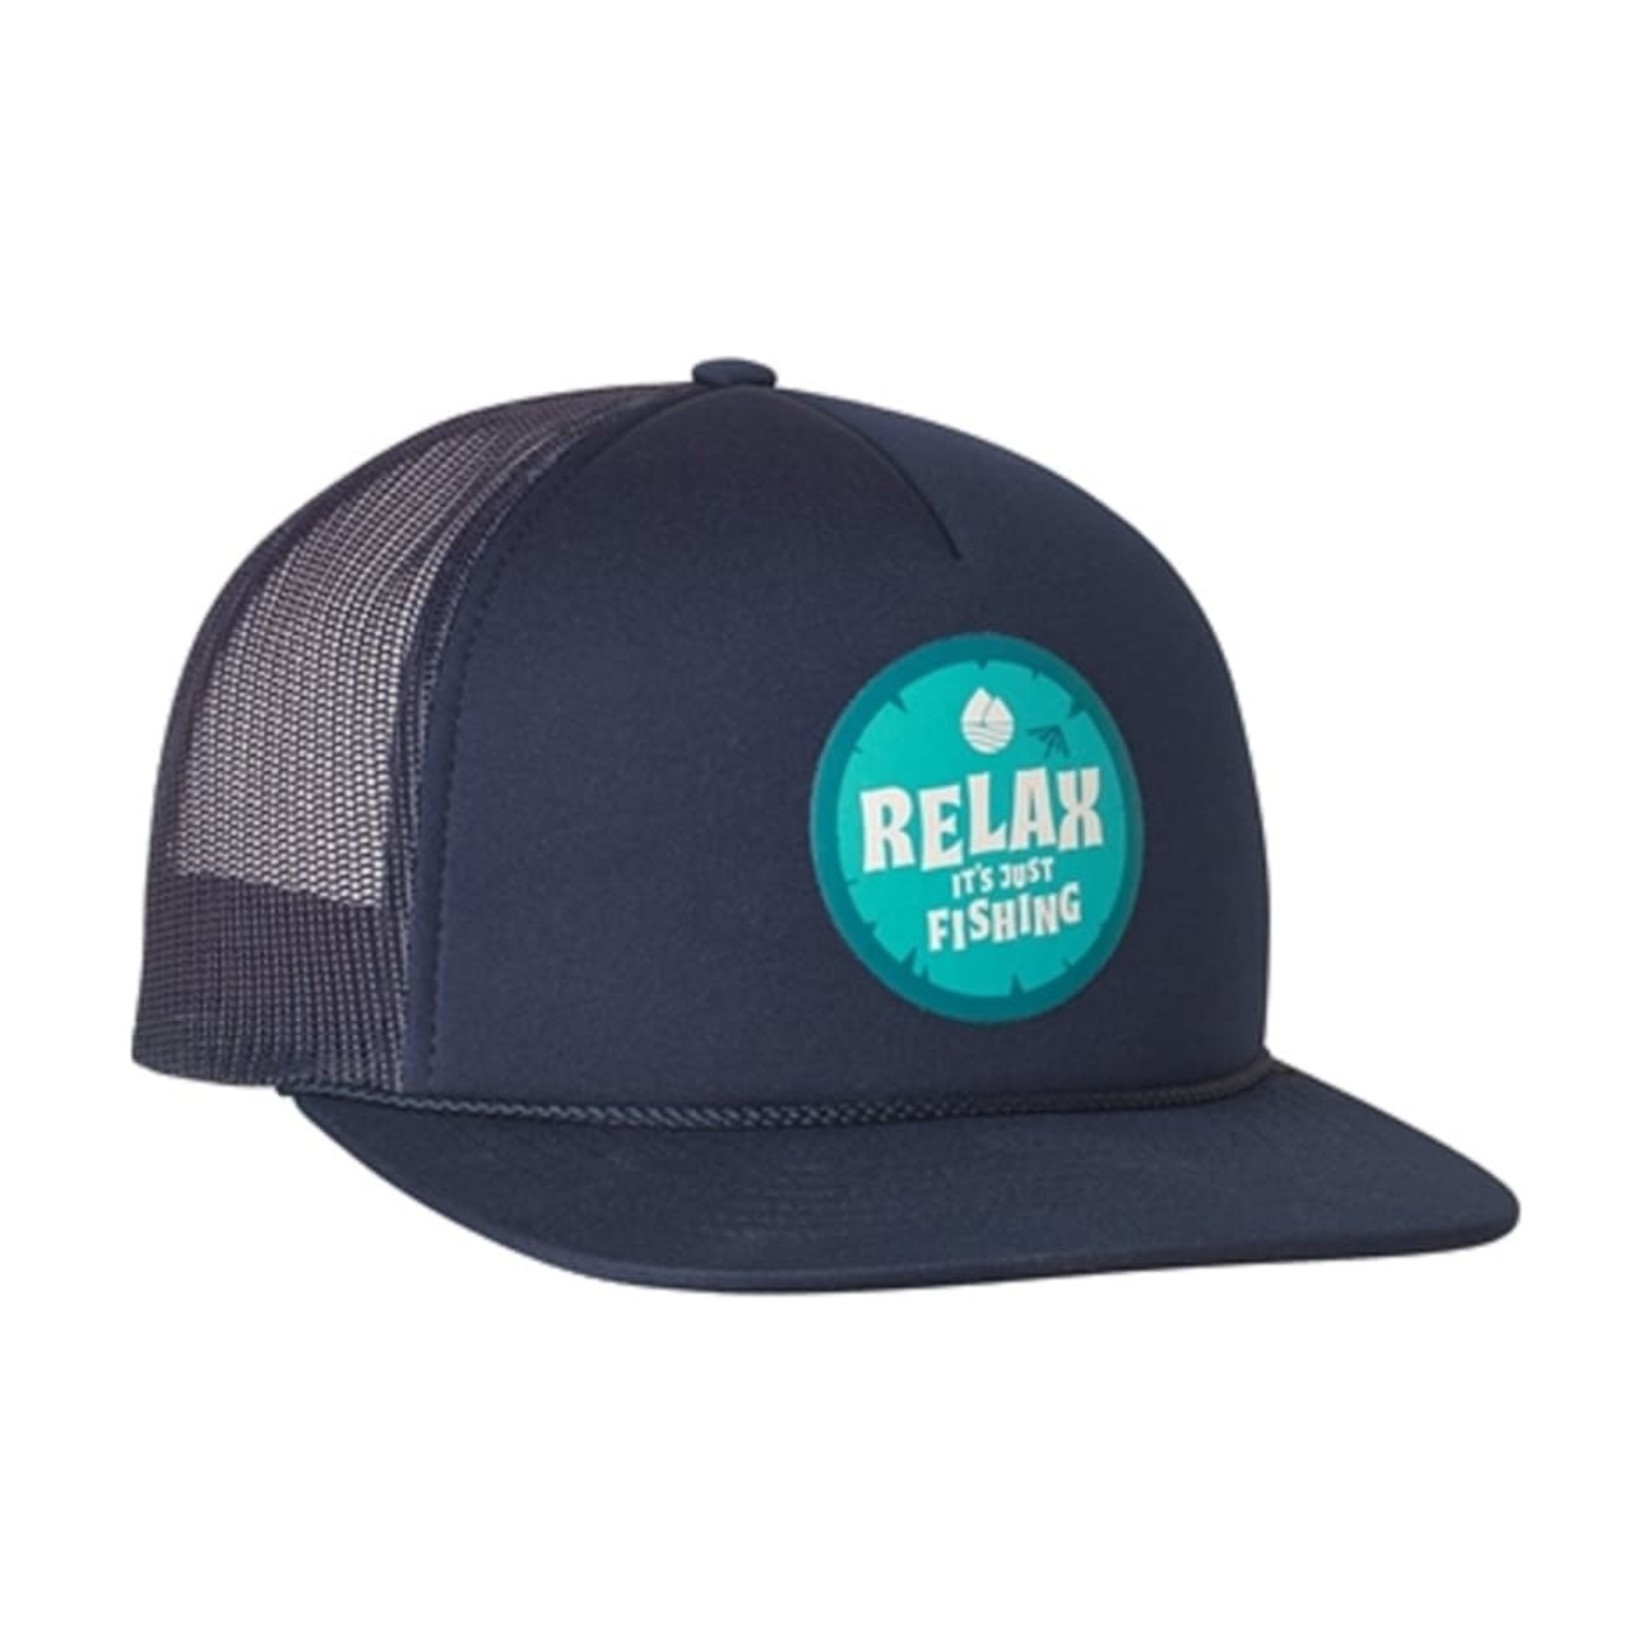 Redington Relax its just Fishing Hat Blue - Black Dog Outdoor Sports